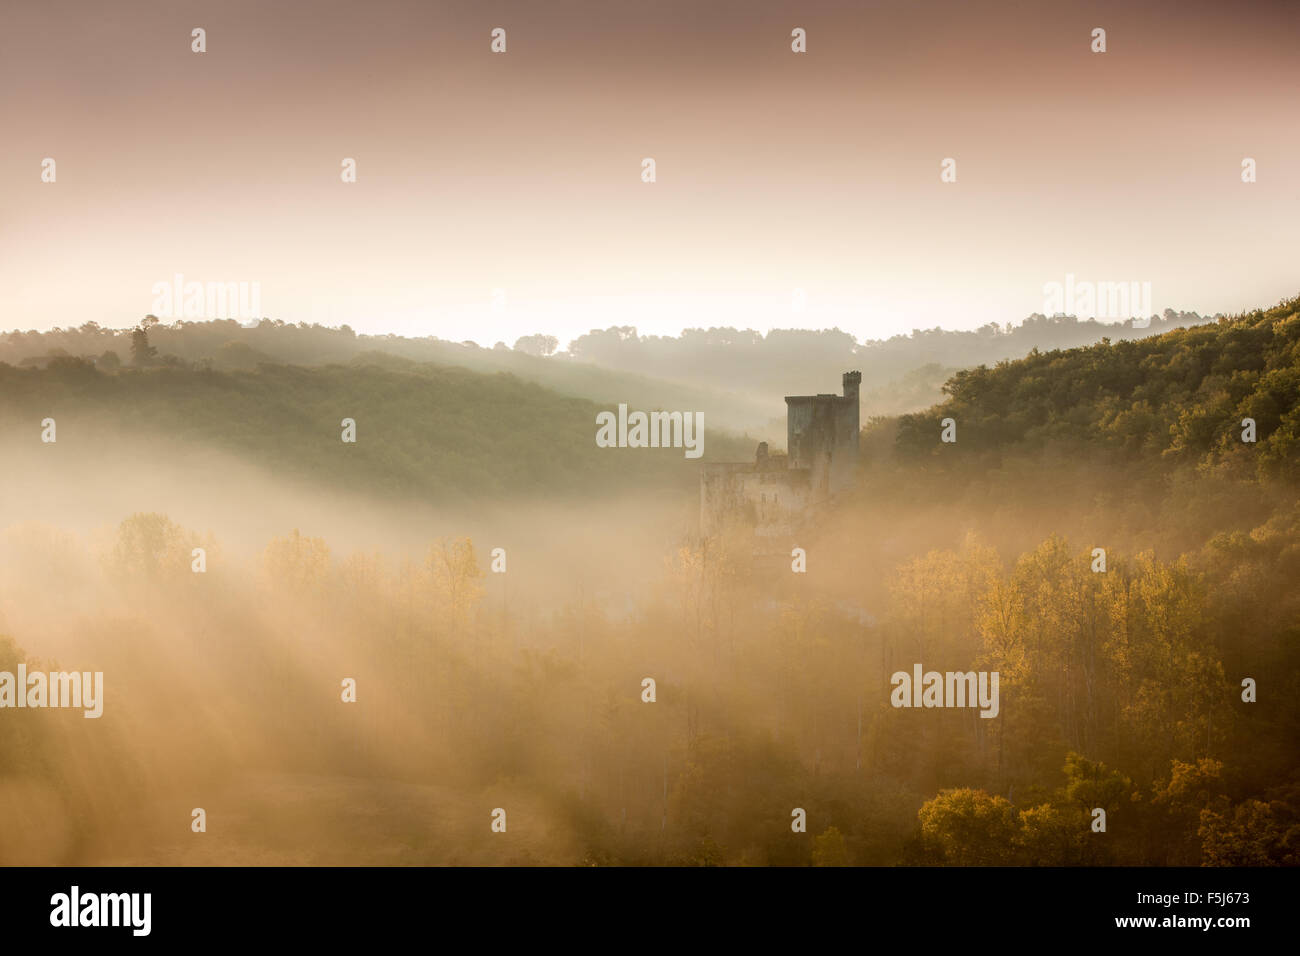 Châteaux Commarque bei Sonnenaufgang Stockfoto